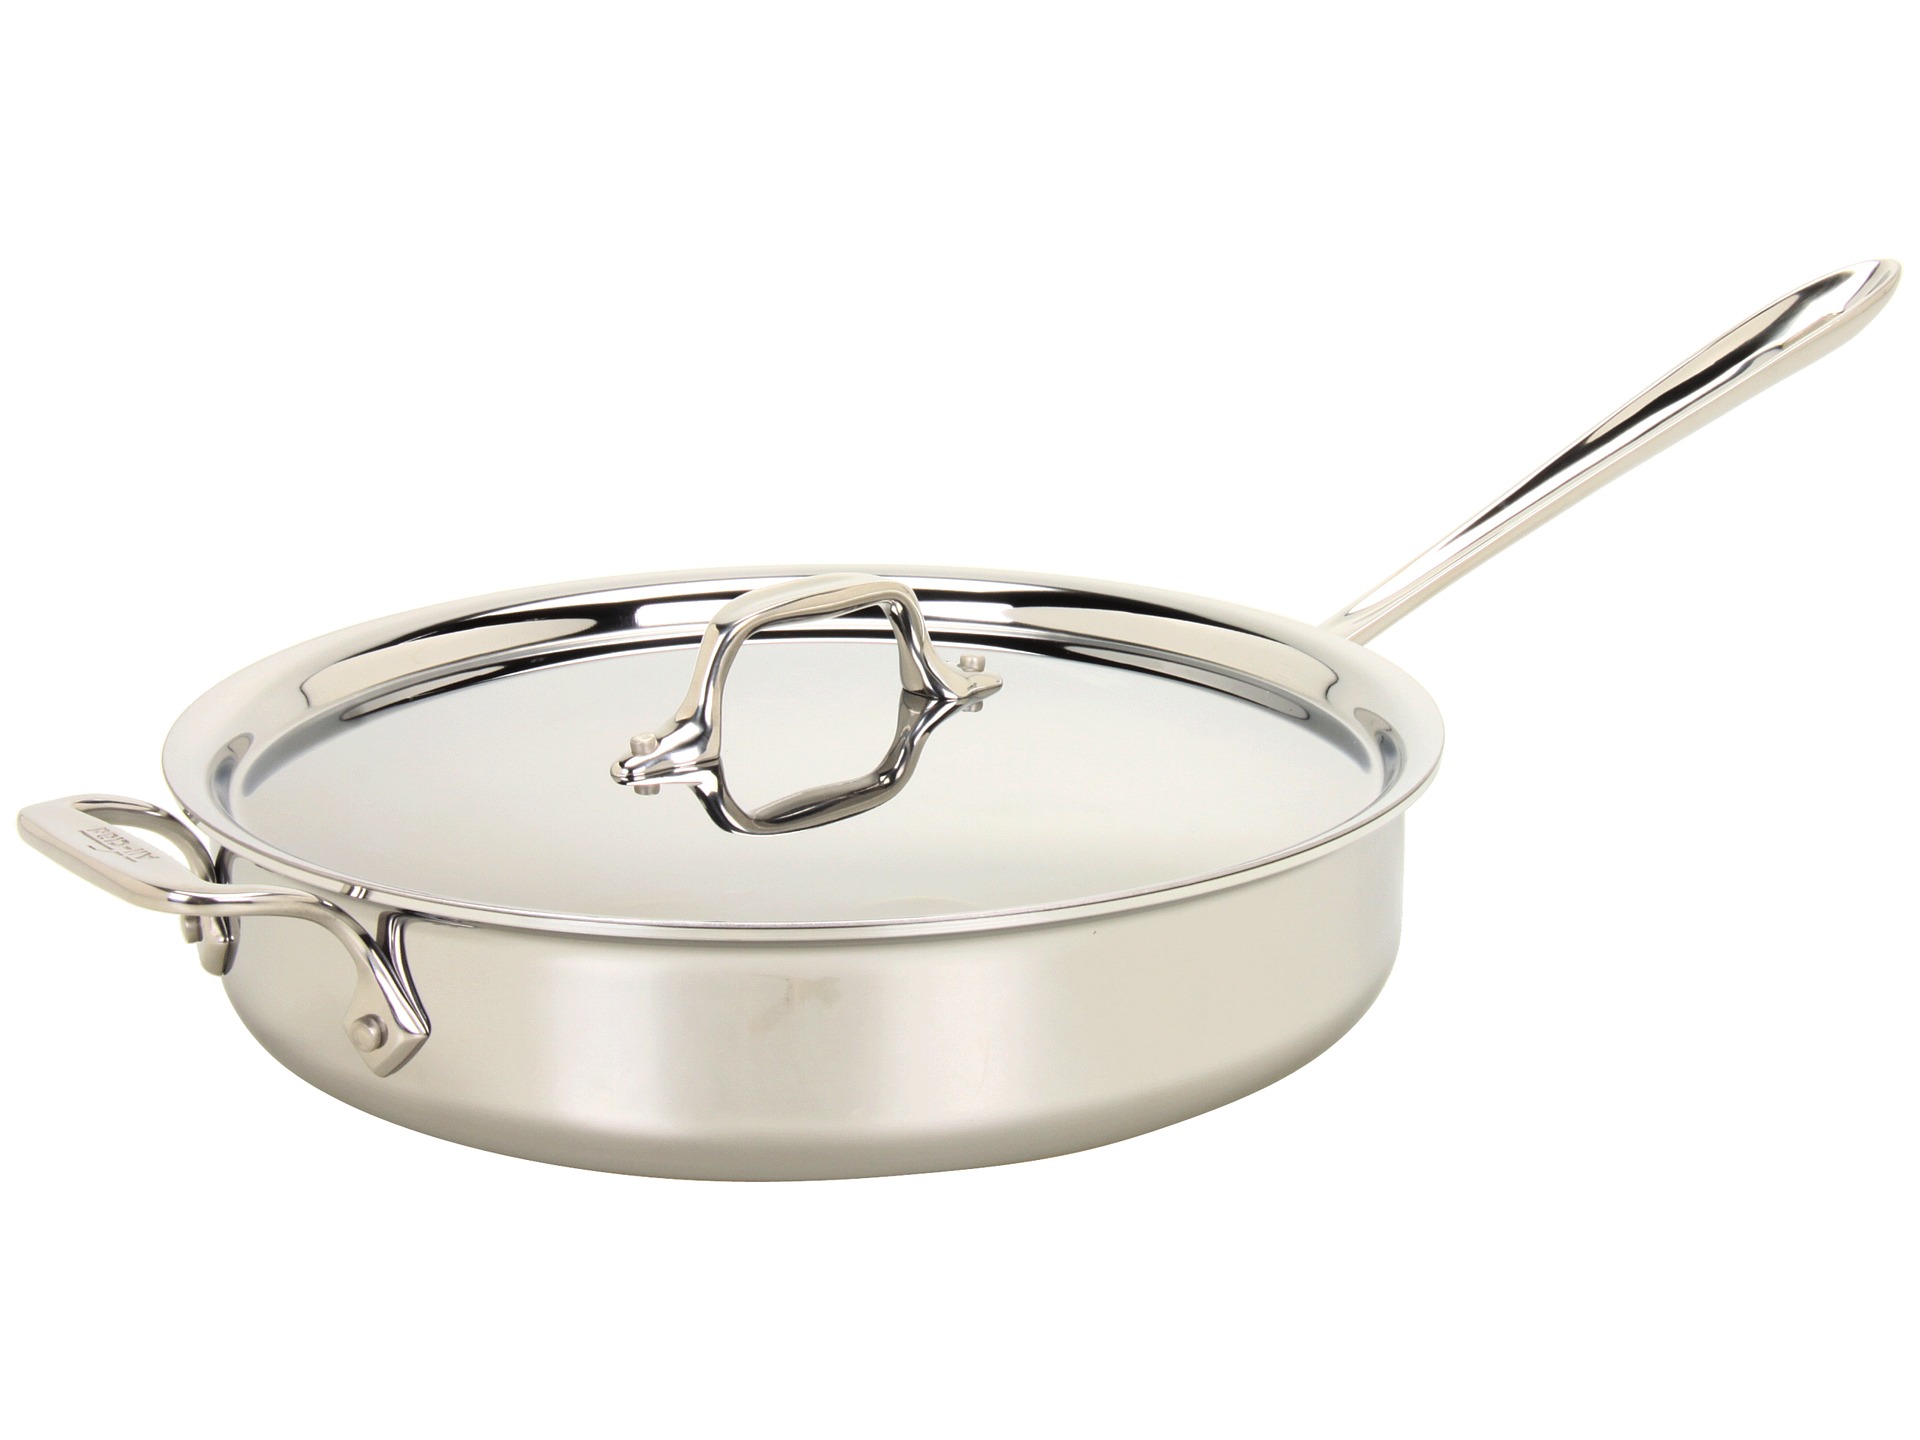 All Clad Stainless Steel 3 Qt Saute Pan With Lid | Shipped Free at Zappos All Clad 3 Quart Stainless Steel Saute Pan